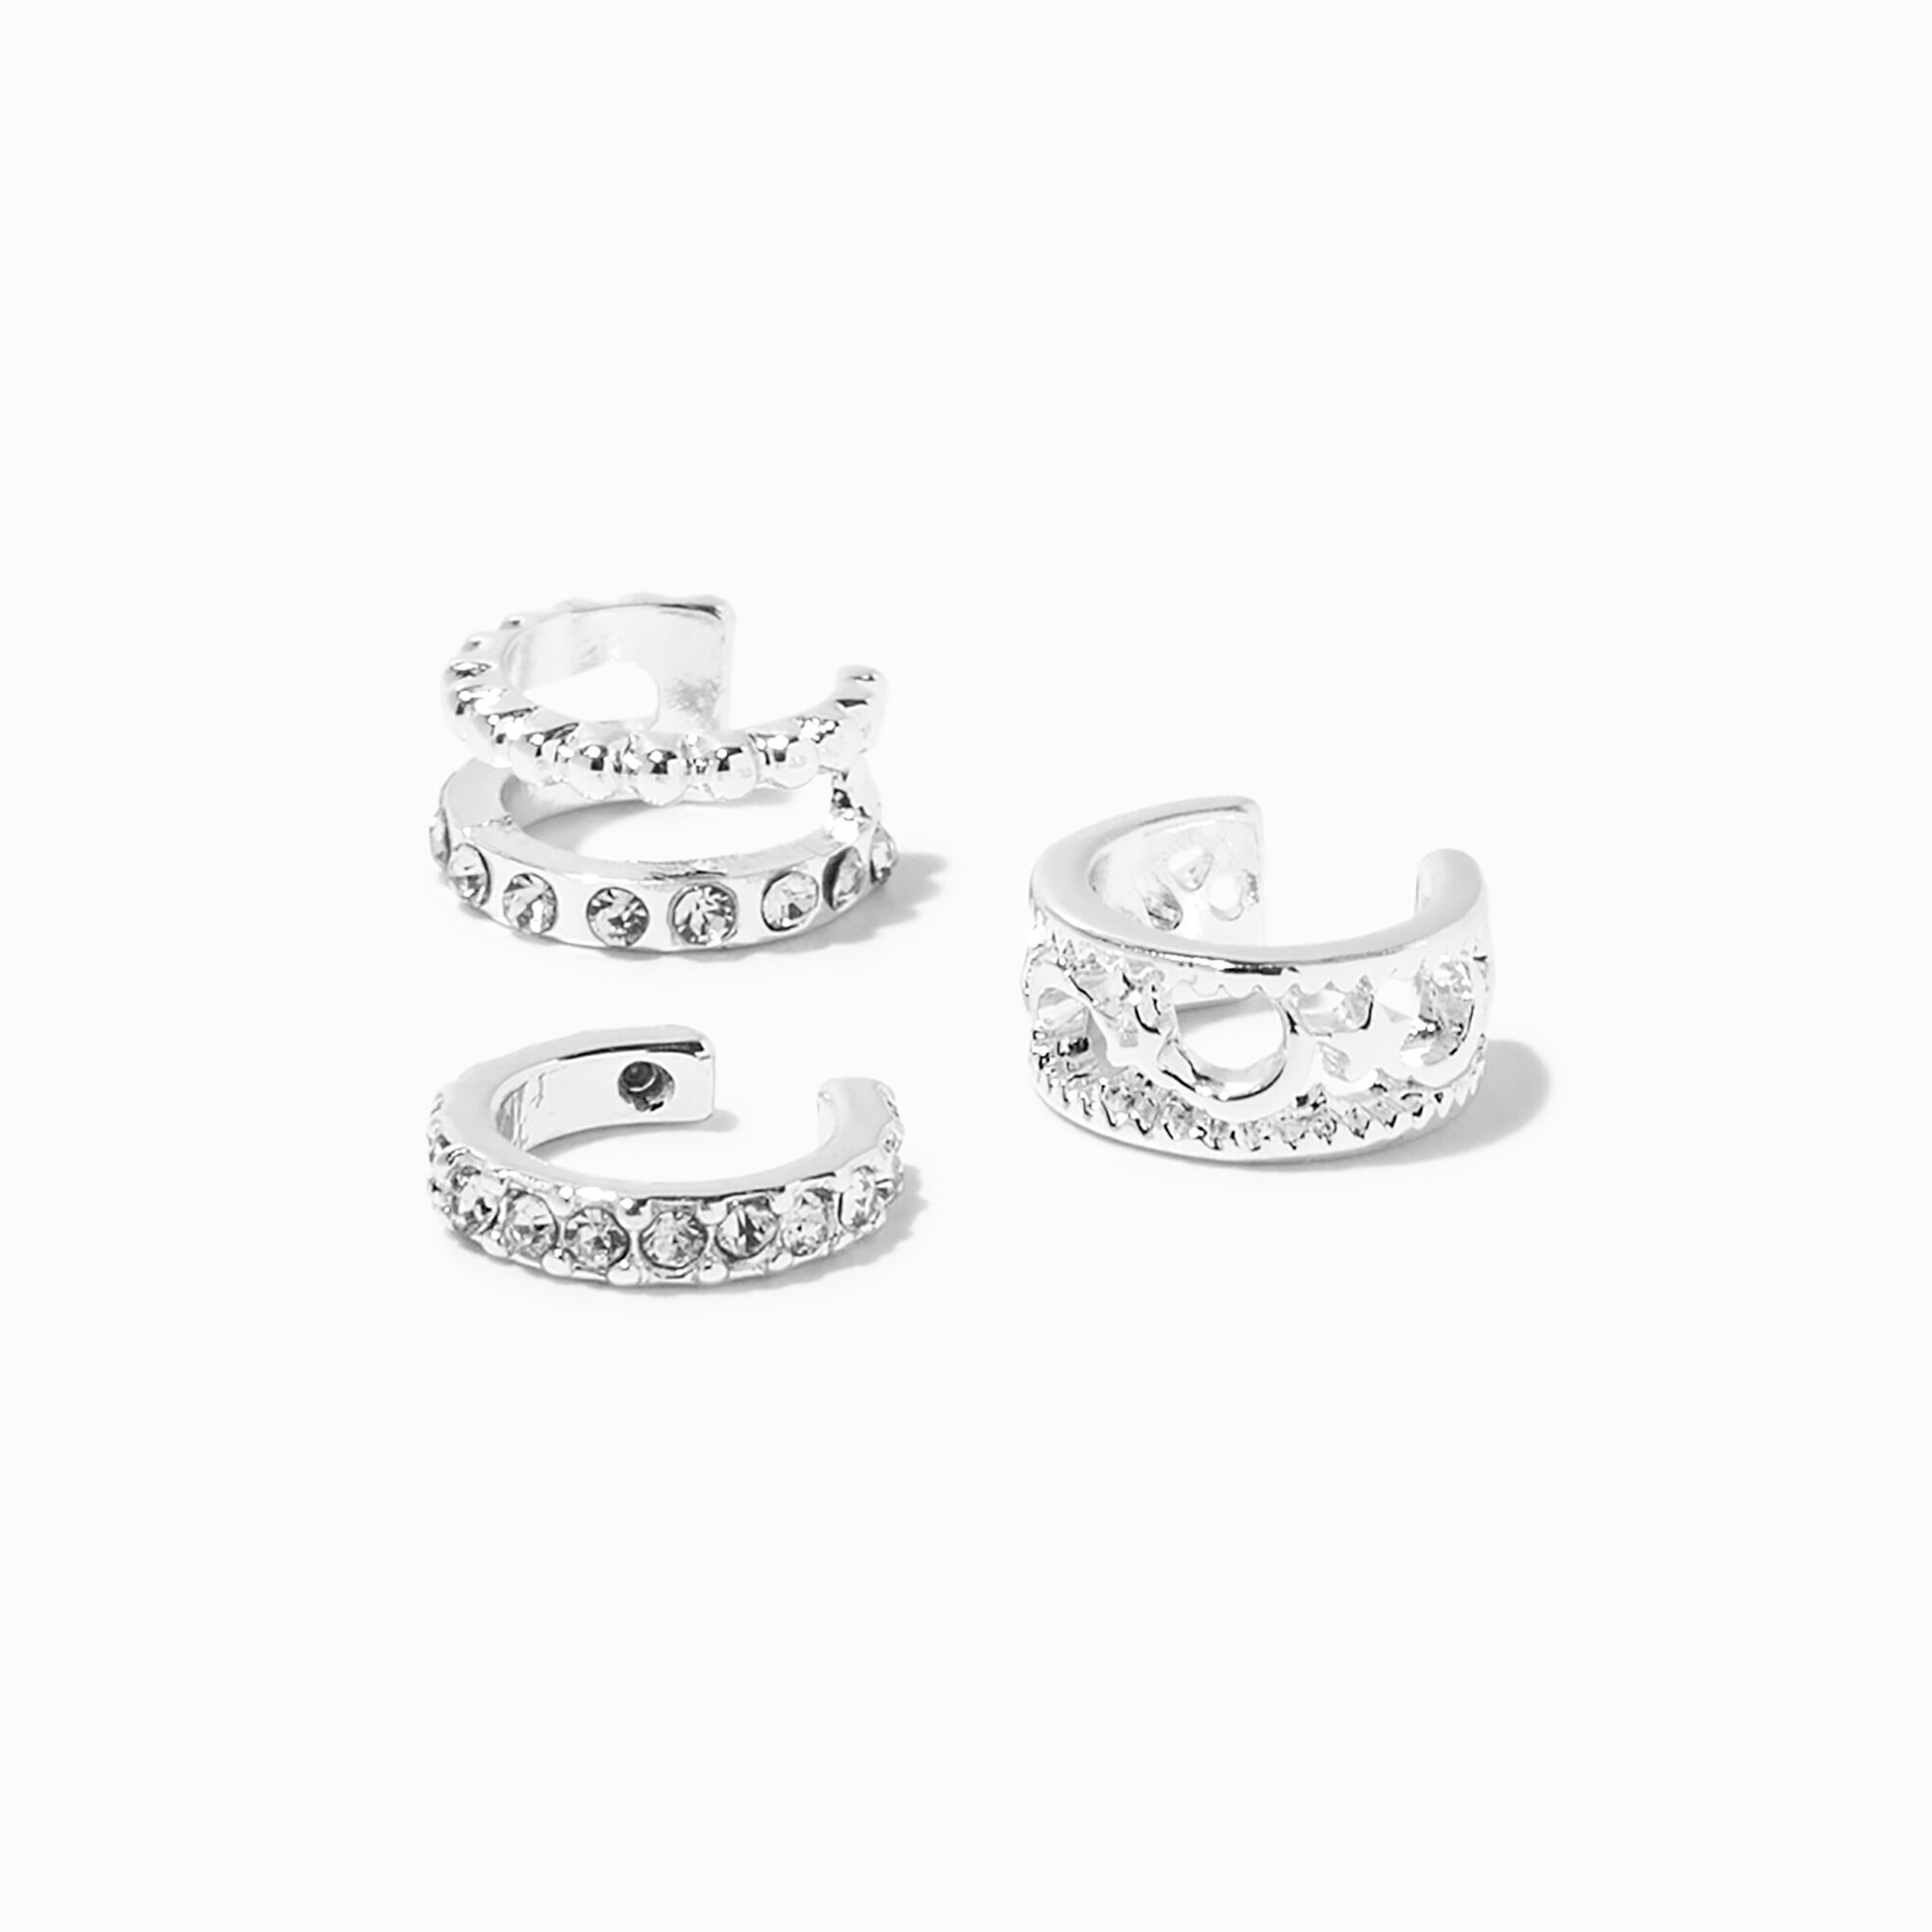 View Claires Tone Crystal Embellished Ear Cuffs 3 Pack Silver information